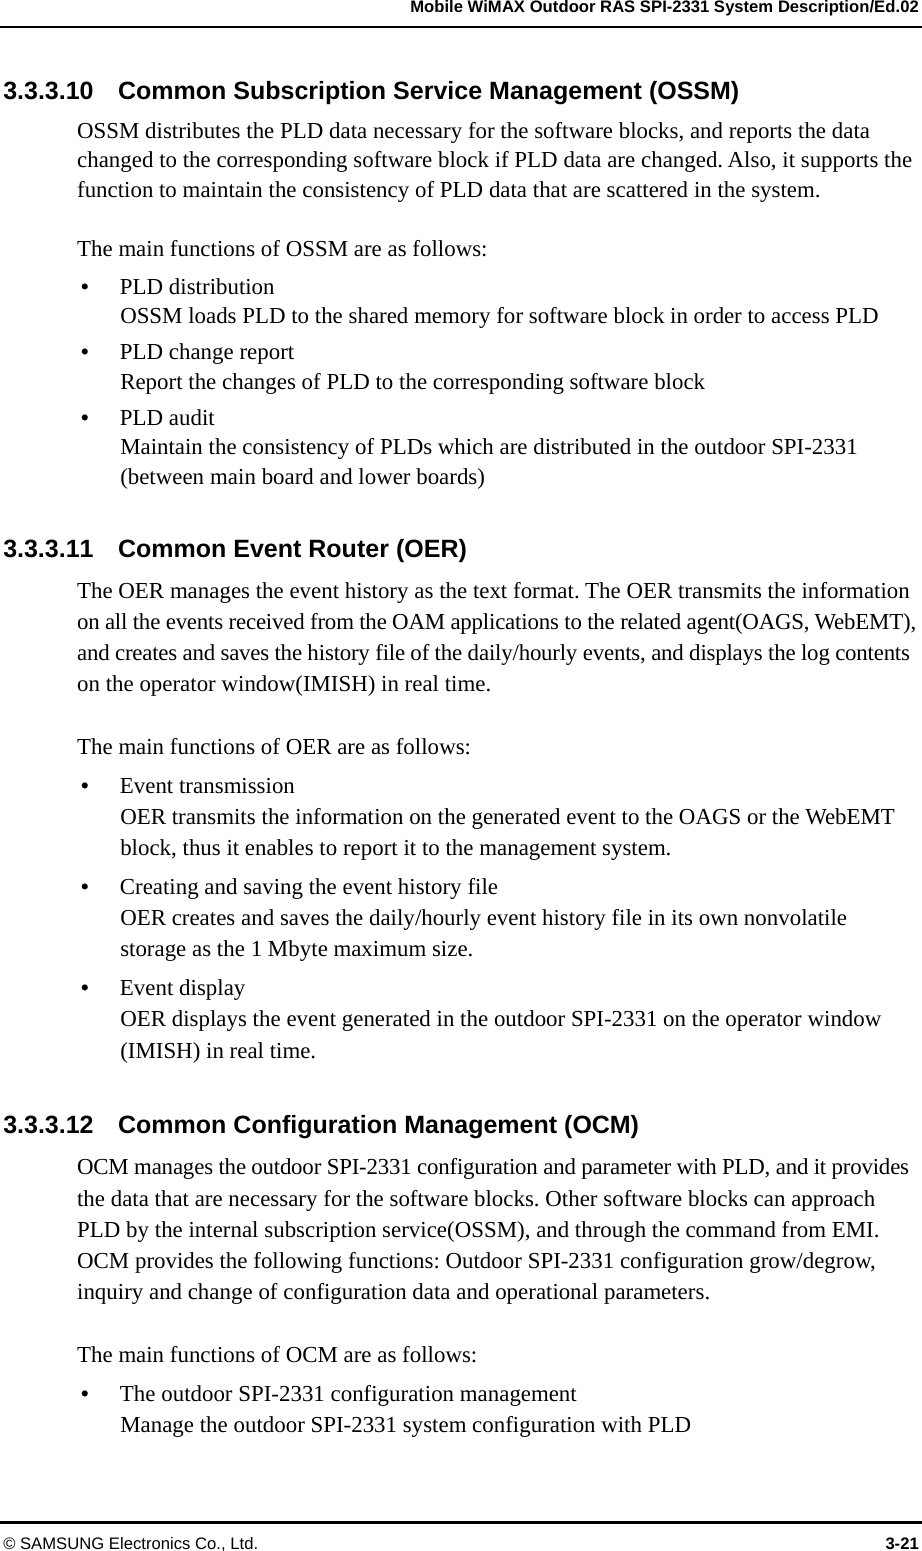   Mobile WiMAX Outdoor RAS SPI-2331 System Description/Ed.02 © SAMSUNG Electronics Co., Ltd.  3-21 3.3.3.10    Common Subscription Service Management (OSSM) OSSM distributes the PLD data necessary for the software blocks, and reports the data changed to the corresponding software block if PLD data are changed. Also, it supports the function to maintain the consistency of PLD data that are scattered in the system.    The main functions of OSSM are as follows: y PLD distribution OSSM loads PLD to the shared memory for software block in order to access PLD y PLD change report   Report the changes of PLD to the corresponding software block y PLD audit   Maintain the consistency of PLDs which are distributed in the outdoor SPI-2331 (between main board and lower boards)  3.3.3.11    Common Event Router (OER) The OER manages the event history as the text format. The OER transmits the information on all the events received from the OAM applications to the related agent(OAGS, WebEMT), and creates and saves the history file of the daily/hourly events, and displays the log contents on the operator window(IMISH) in real time.    The main functions of OER are as follows: y Event transmission OER transmits the information on the generated event to the OAGS or the WebEMT block, thus it enables to report it to the management system.   y Creating and saving the event history file OER creates and saves the daily/hourly event history file in its own nonvolatile storage as the 1 Mbyte maximum size. y Event display   OER displays the event generated in the outdoor SPI-2331 on the operator window (IMISH) in real time.  3.3.3.12    Common Configuration Management (OCM) OCM manages the outdoor SPI-2331 configuration and parameter with PLD, and it provides the data that are necessary for the software blocks. Other software blocks can approach PLD by the internal subscription service(OSSM), and through the command from EMI. OCM provides the following functions: Outdoor SPI-2331 configuration grow/degrow, inquiry and change of configuration data and operational parameters.  The main functions of OCM are as follows: y The outdoor SPI-2331 configuration management Manage the outdoor SPI-2331 system configuration with PLD 